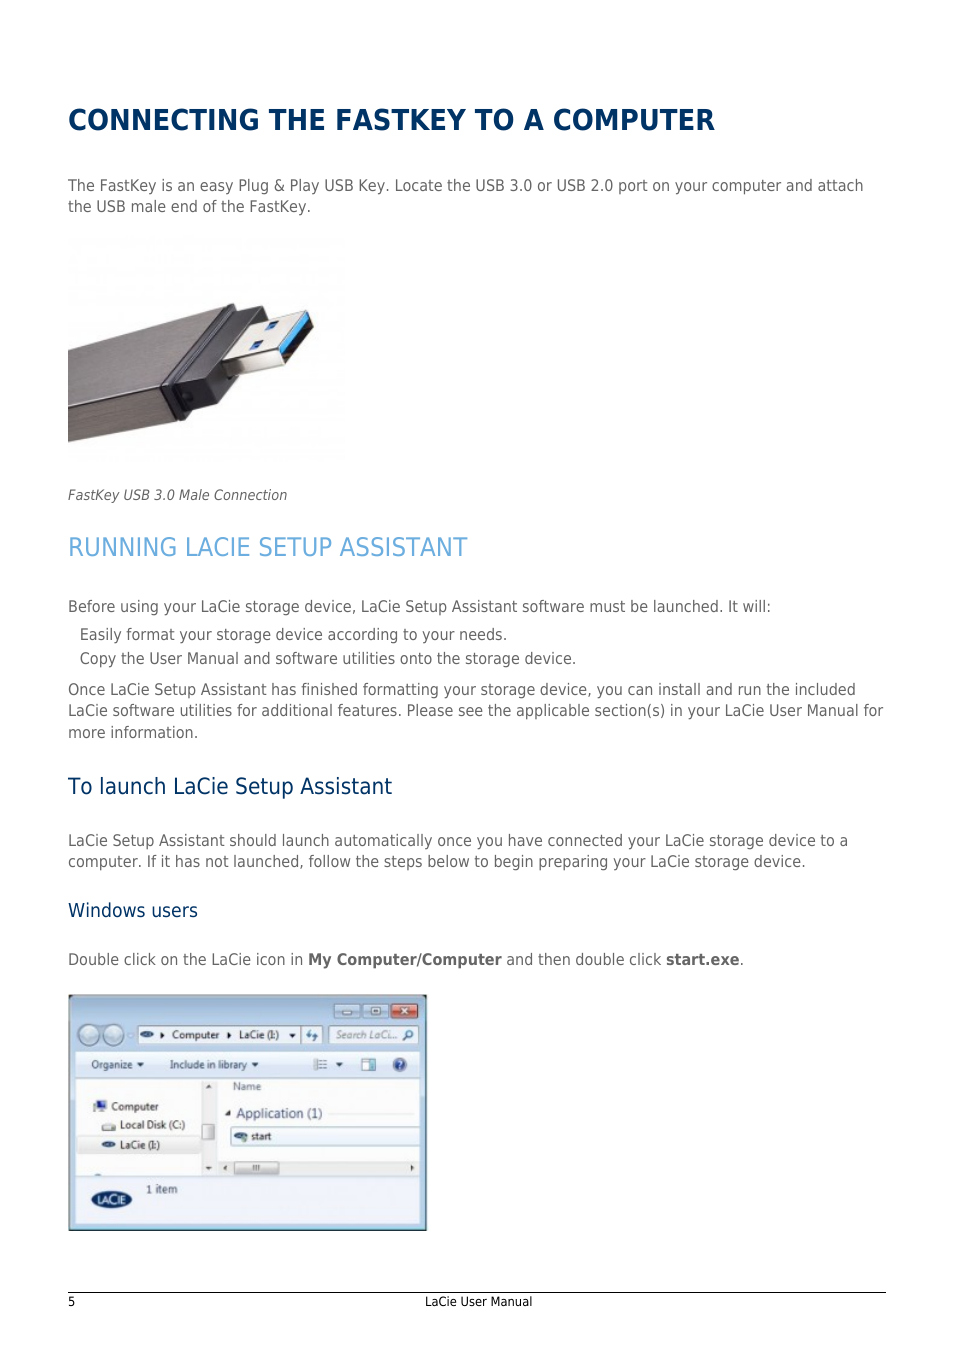 Connecting the fastkey to a computer, Running lacie setup assistant, To launch lacie setup assistant | LaCie 14F User Manual | Page 5 / 54